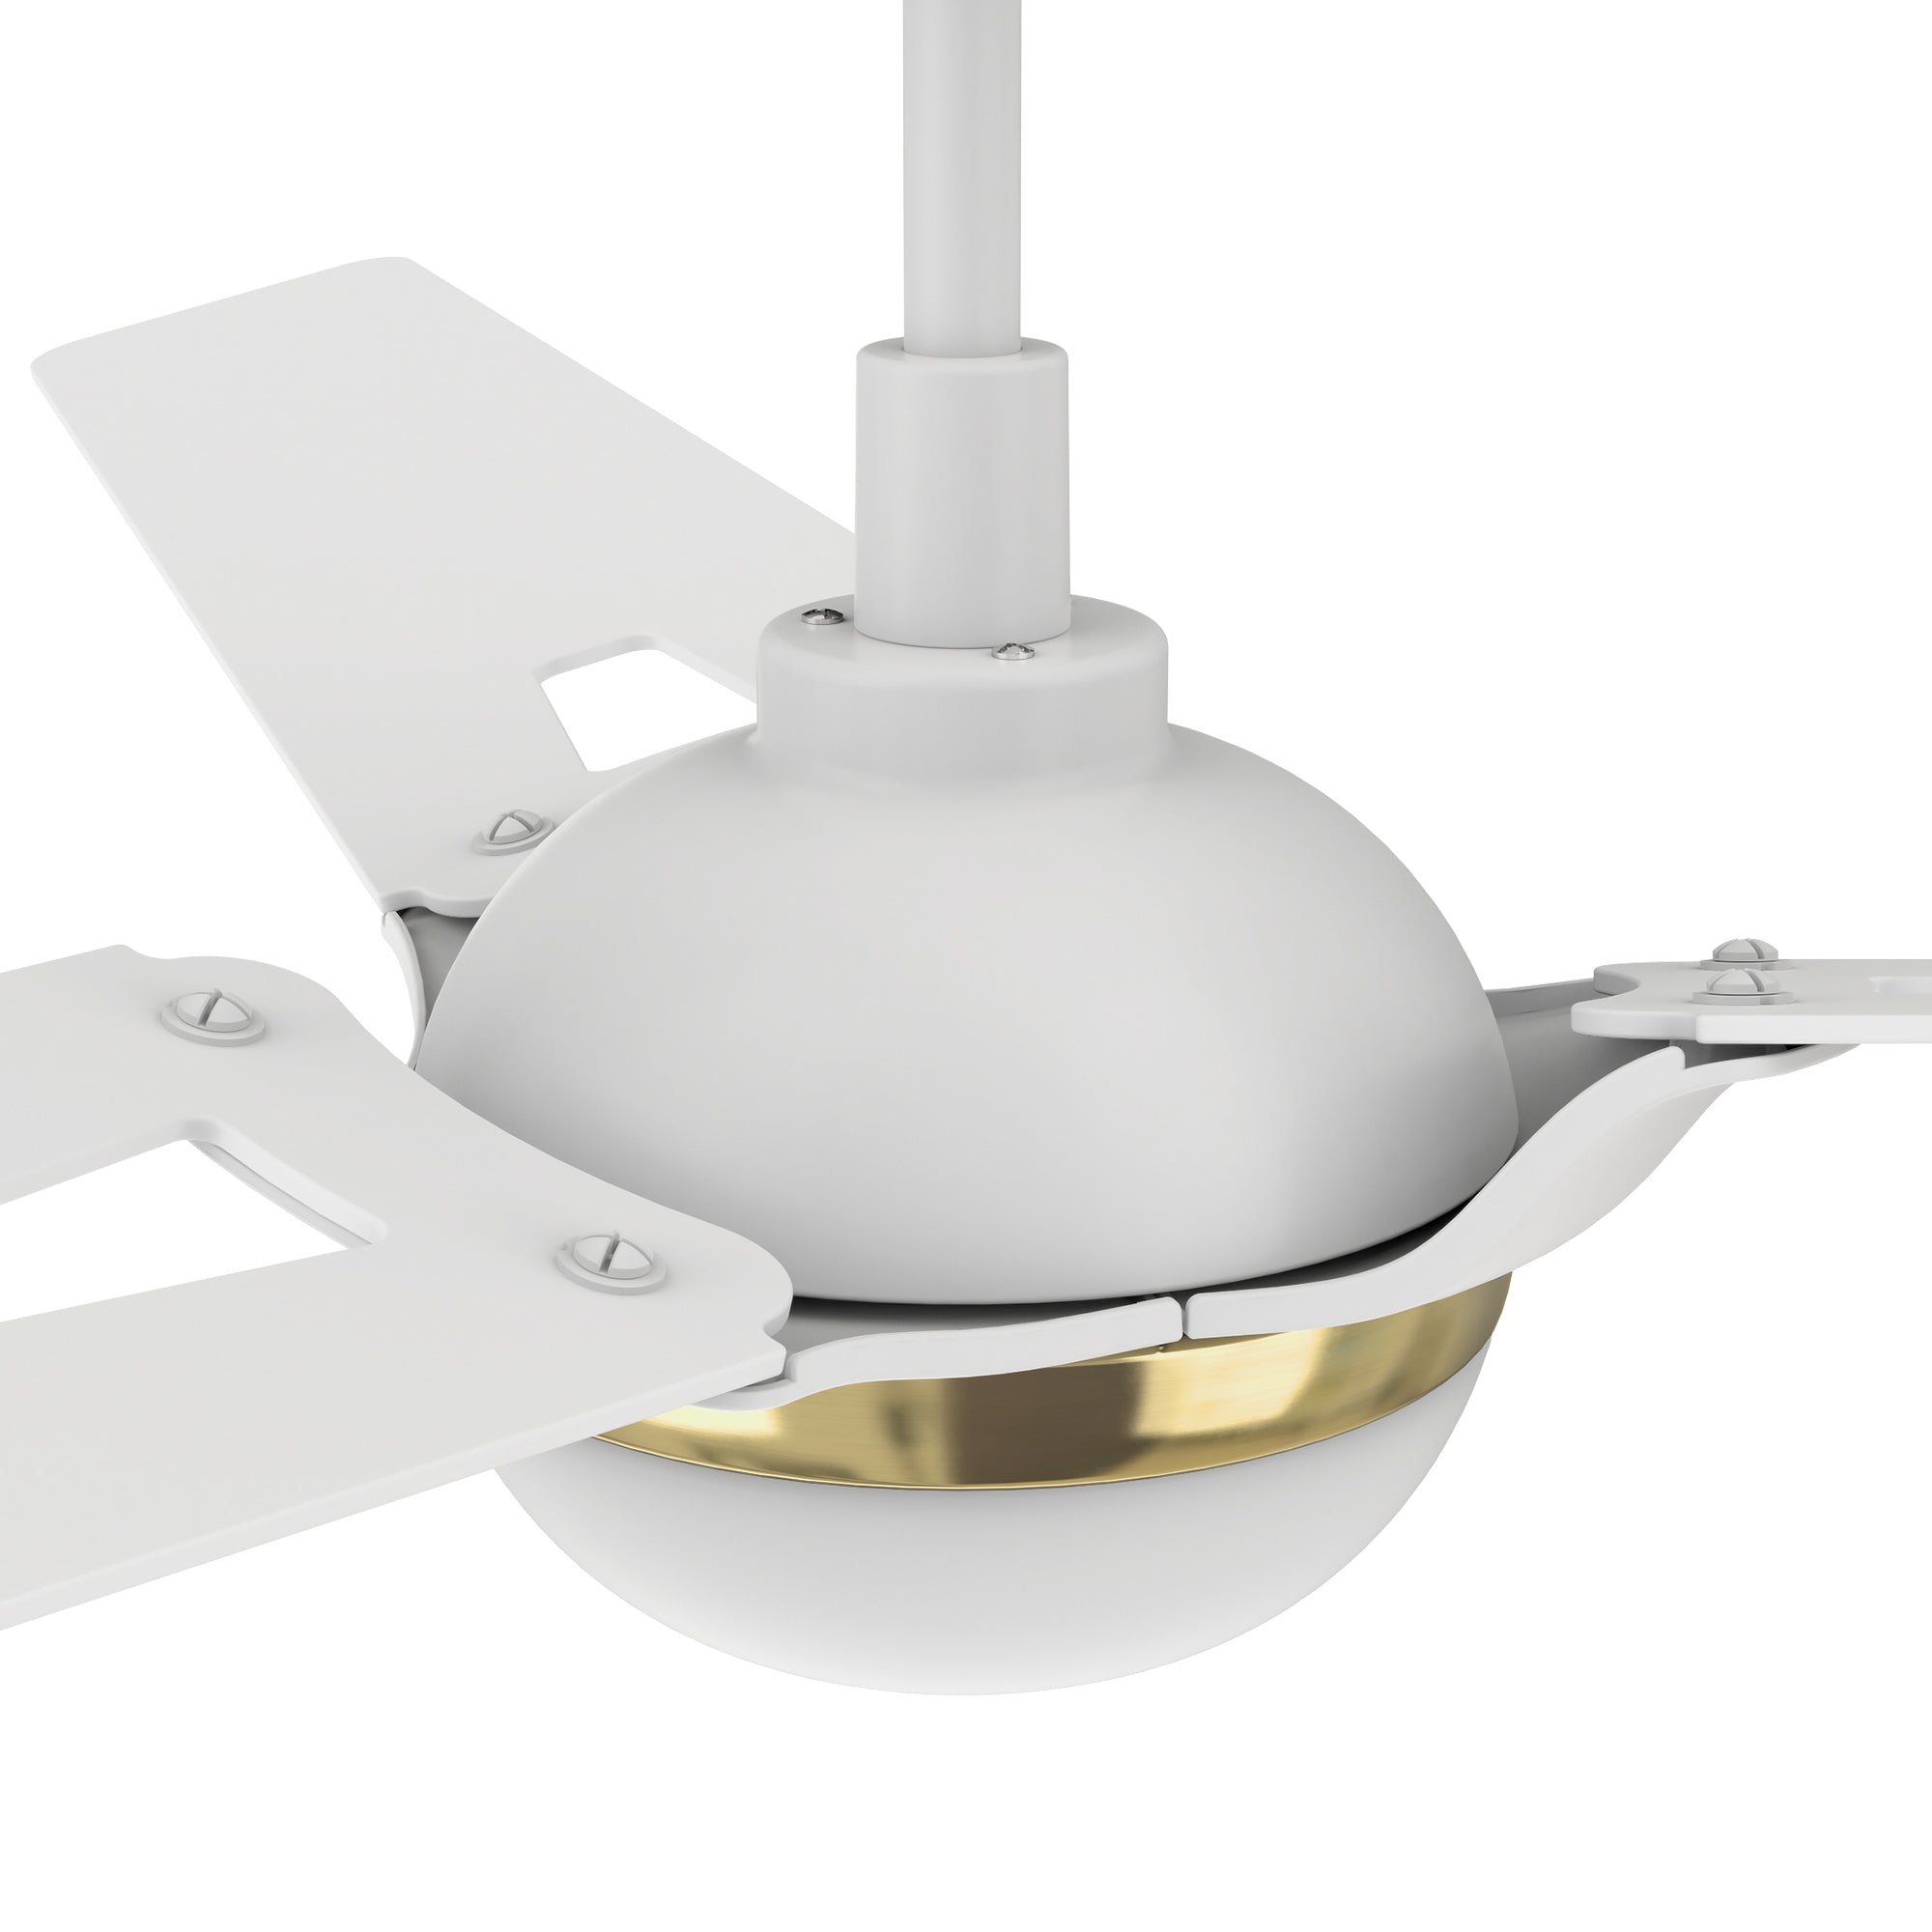 This Clifden 52&#39;&#39; smart ceiling fan keeps your space cool, bright, and stylish. It is a soft modern masterpiece perfect for your large indoor living spaces. This Wifi smart ceiling fan is a simplicity designing with White finish, use elegant Plywood blades and has an integrated 4000K LED daylight. The fan features Remote control, Wi-Fi apps, Siri Shortcut and Voice control technology (compatible with Amazon Alexa and Google Home Assistant ) to set fan preferences.